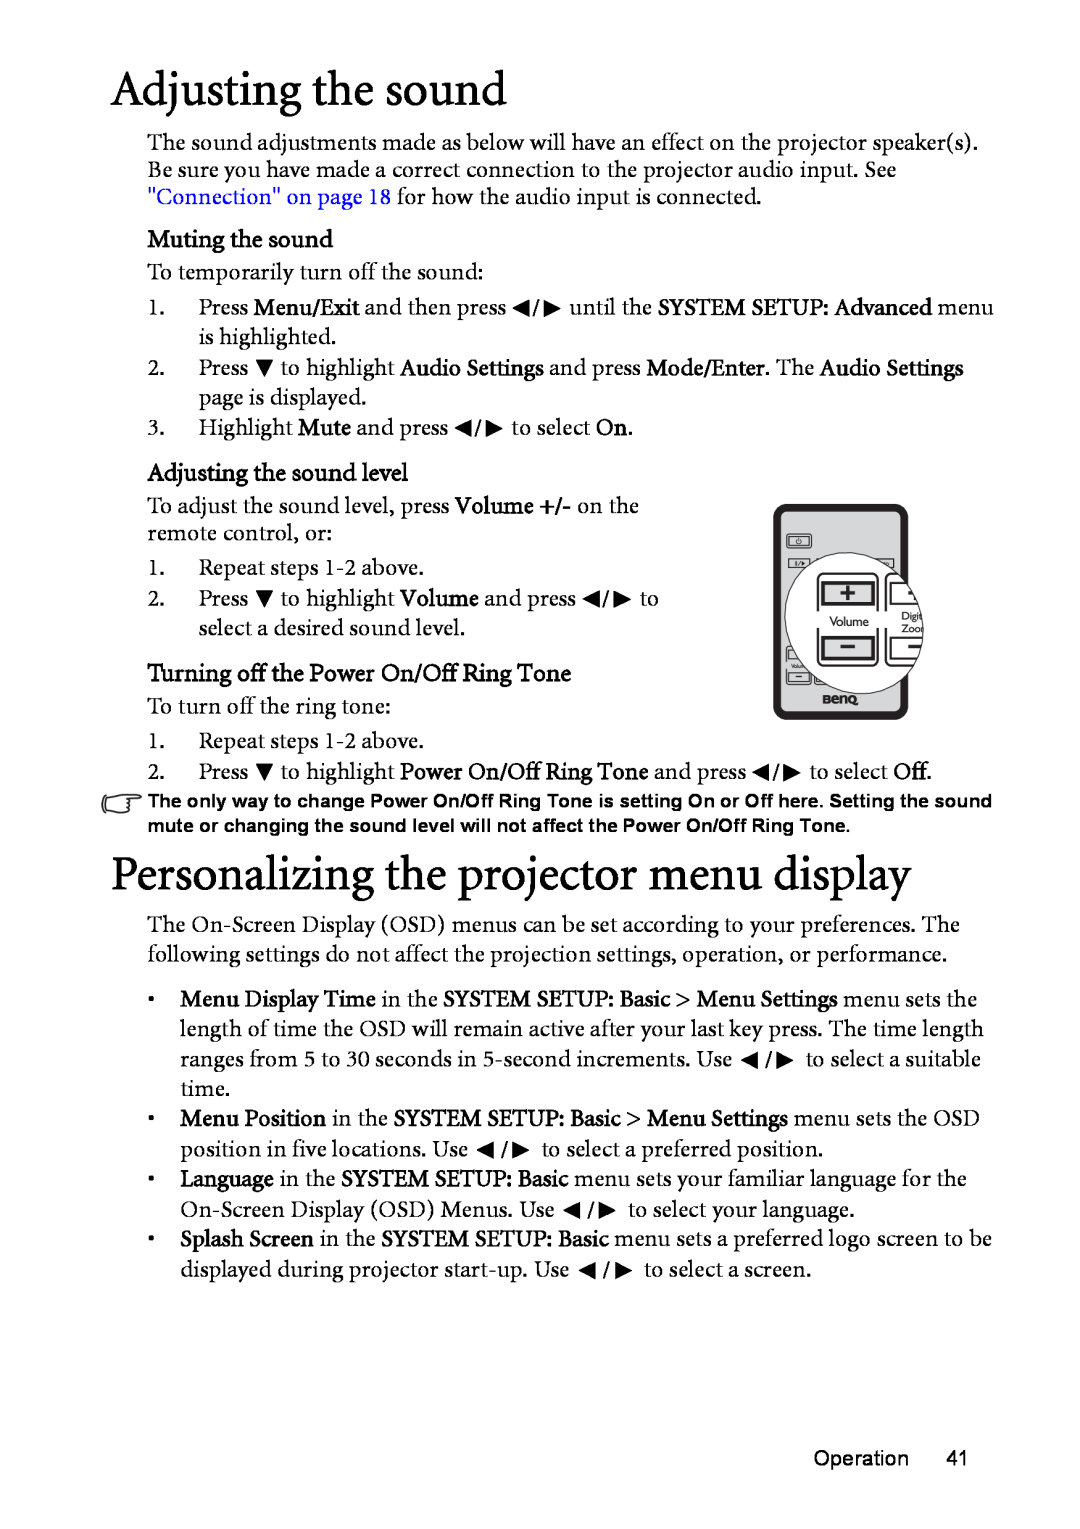 BenQ MP575, MP576, MP525P, MP526 Personalizing the projector menu display, Muting the sound, Adjusting the sound level 